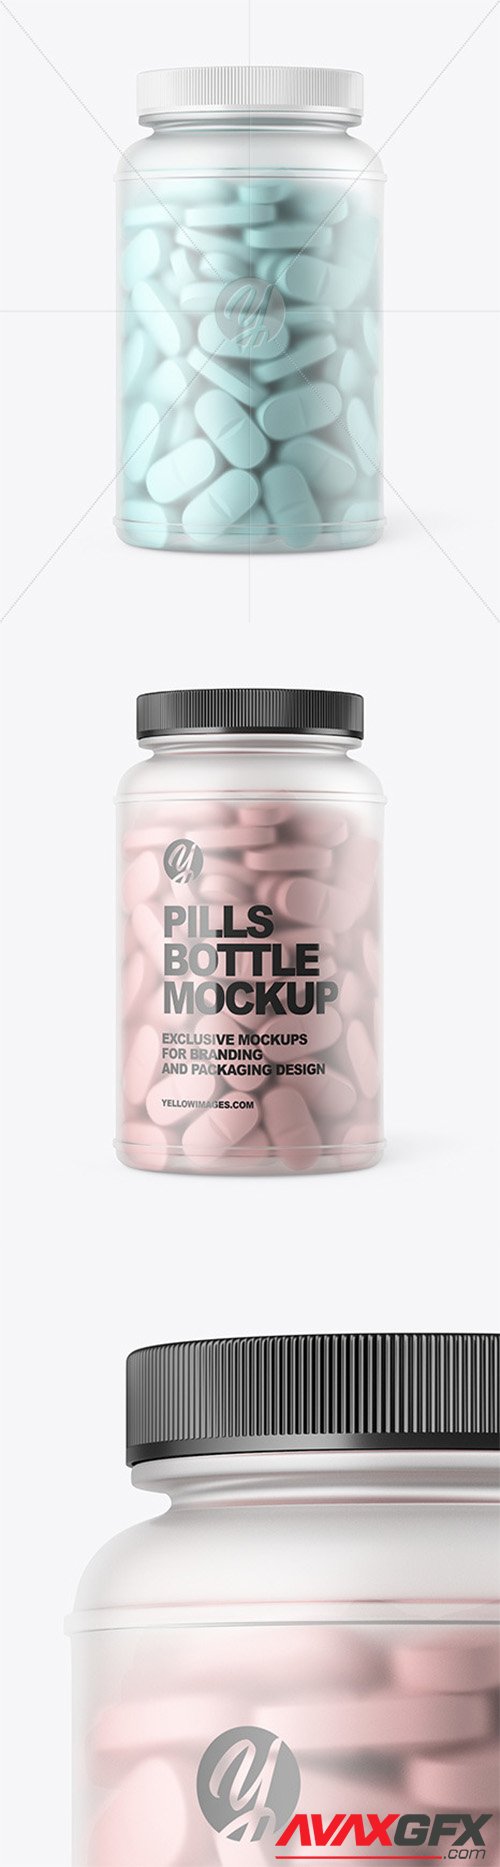 Download Frosted Pills Bottle Mockup 60524 Avaxgfx All Downloads That You Need In One Place Graphic From Nitroflare Rapidgator Yellowimages Mockups